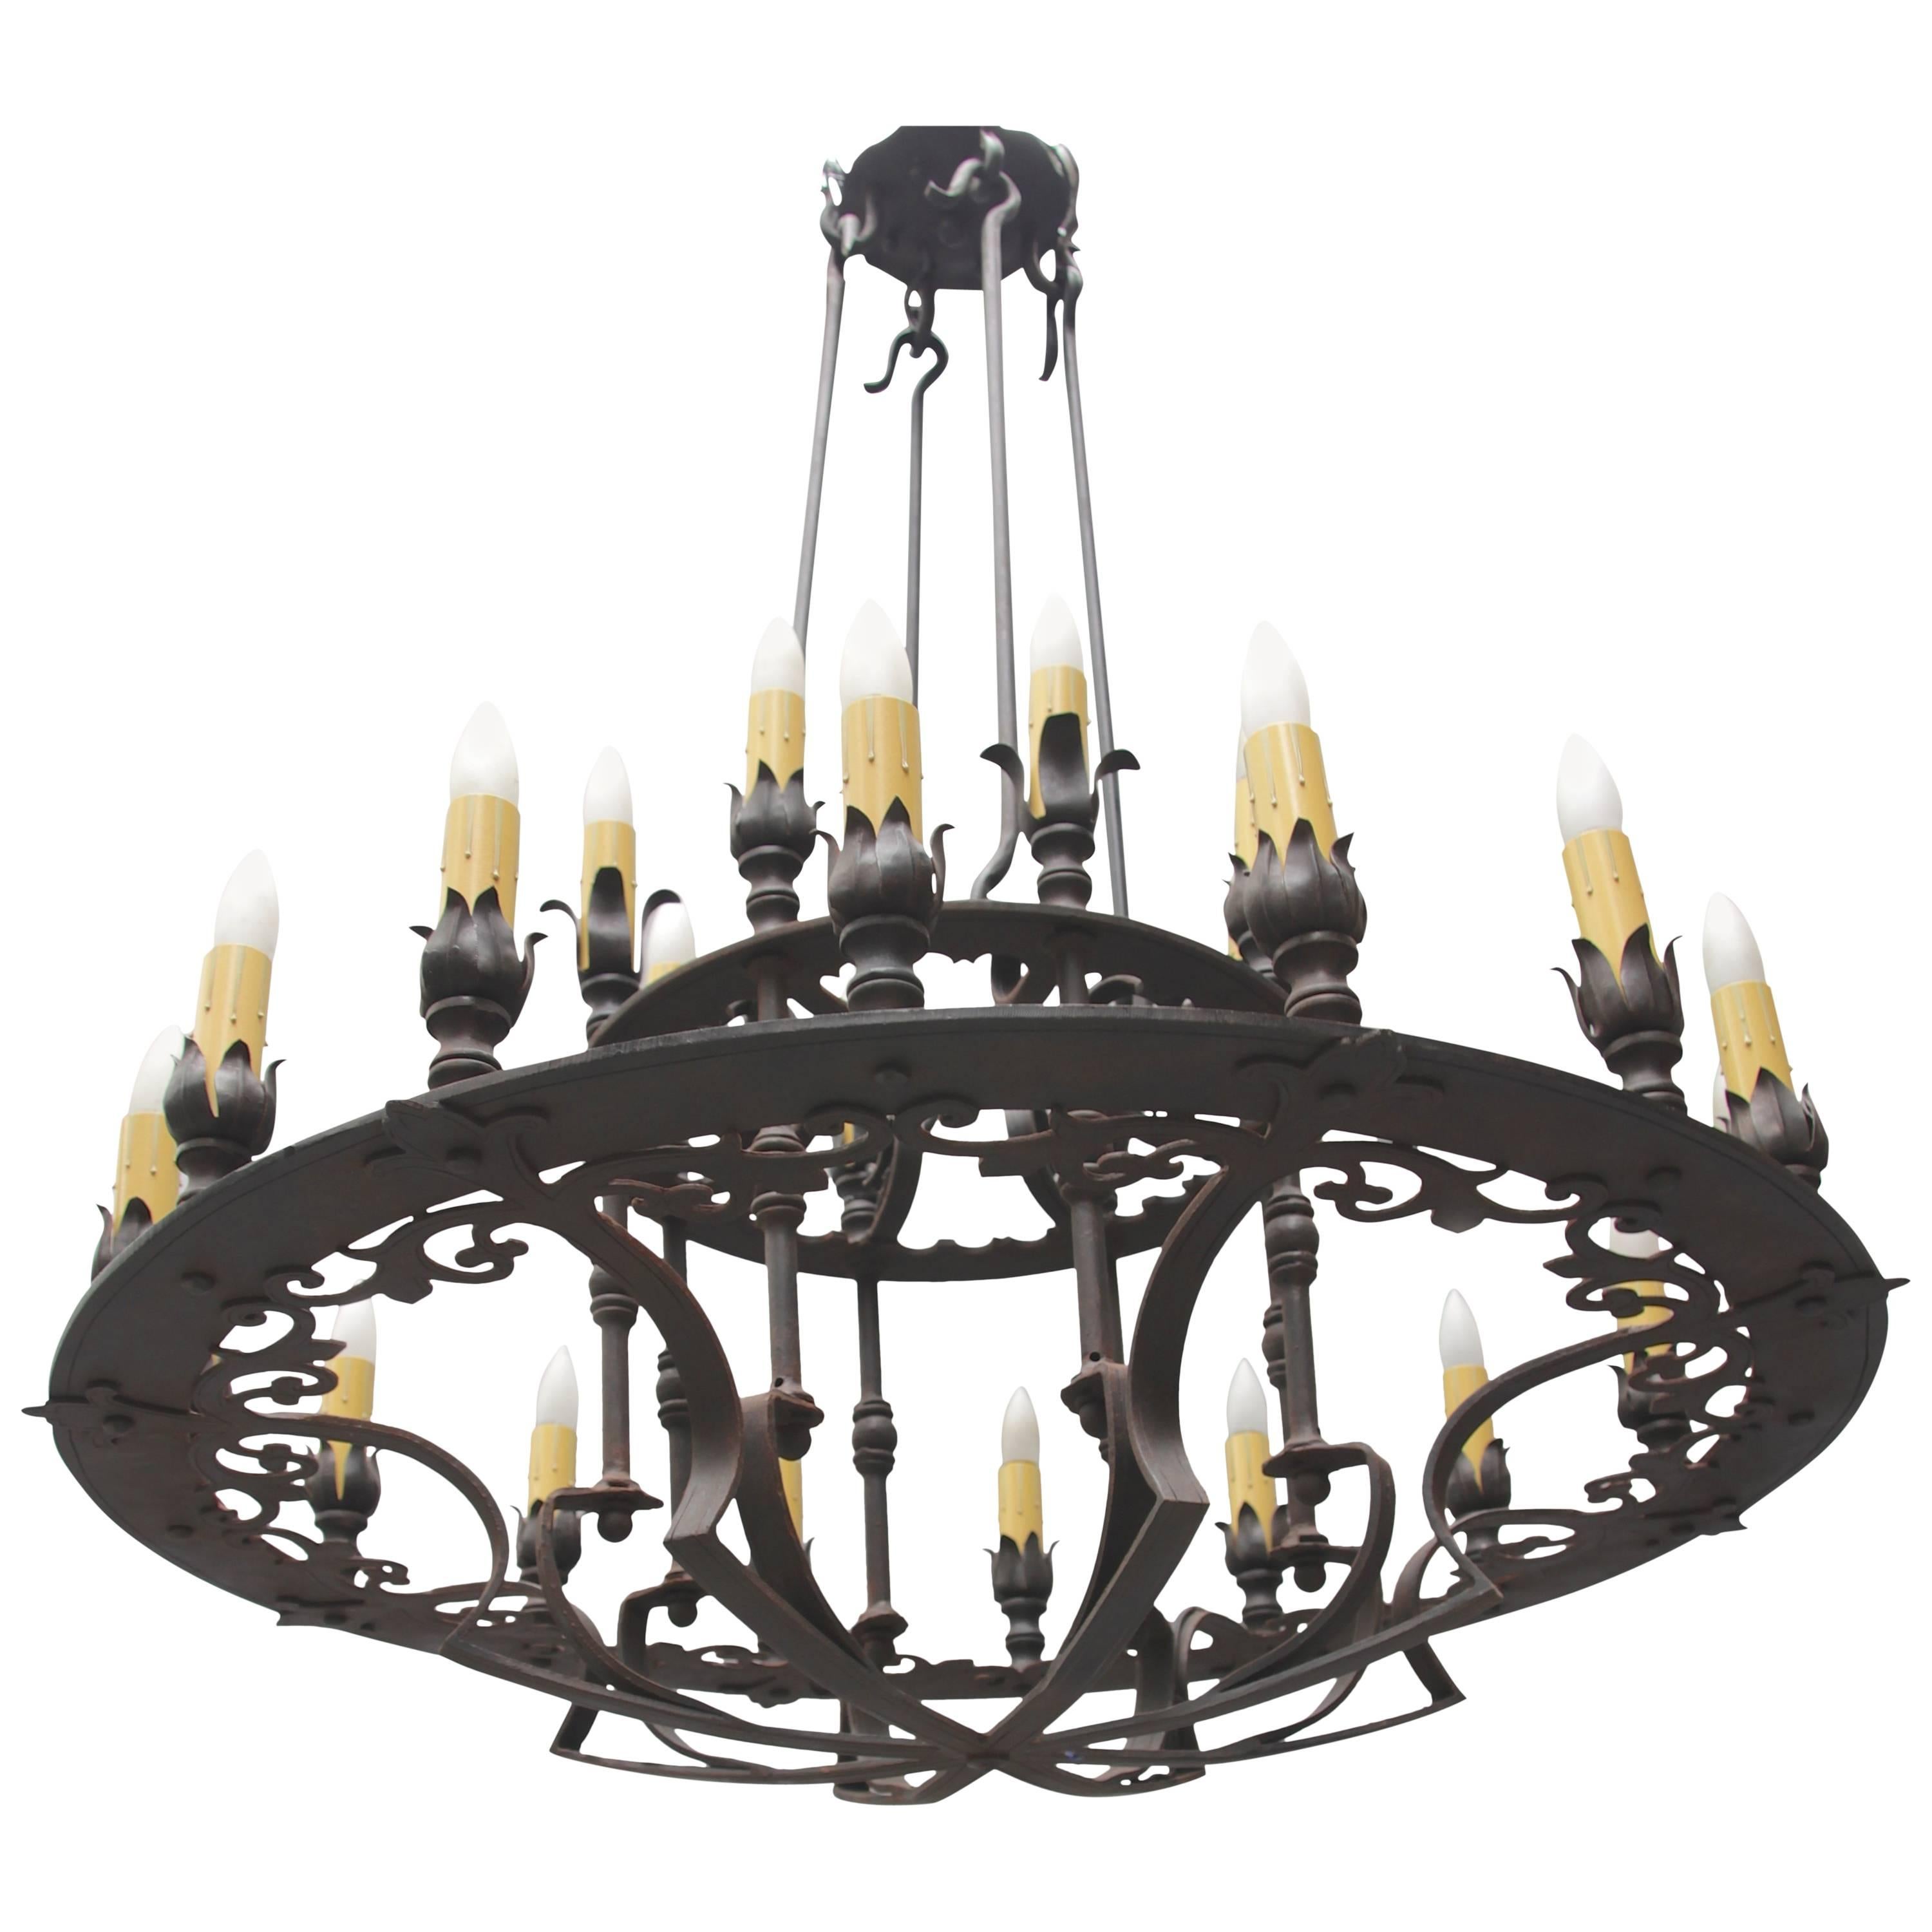 Custom Two-Tiered Wrought Iron Spanish Chandelier